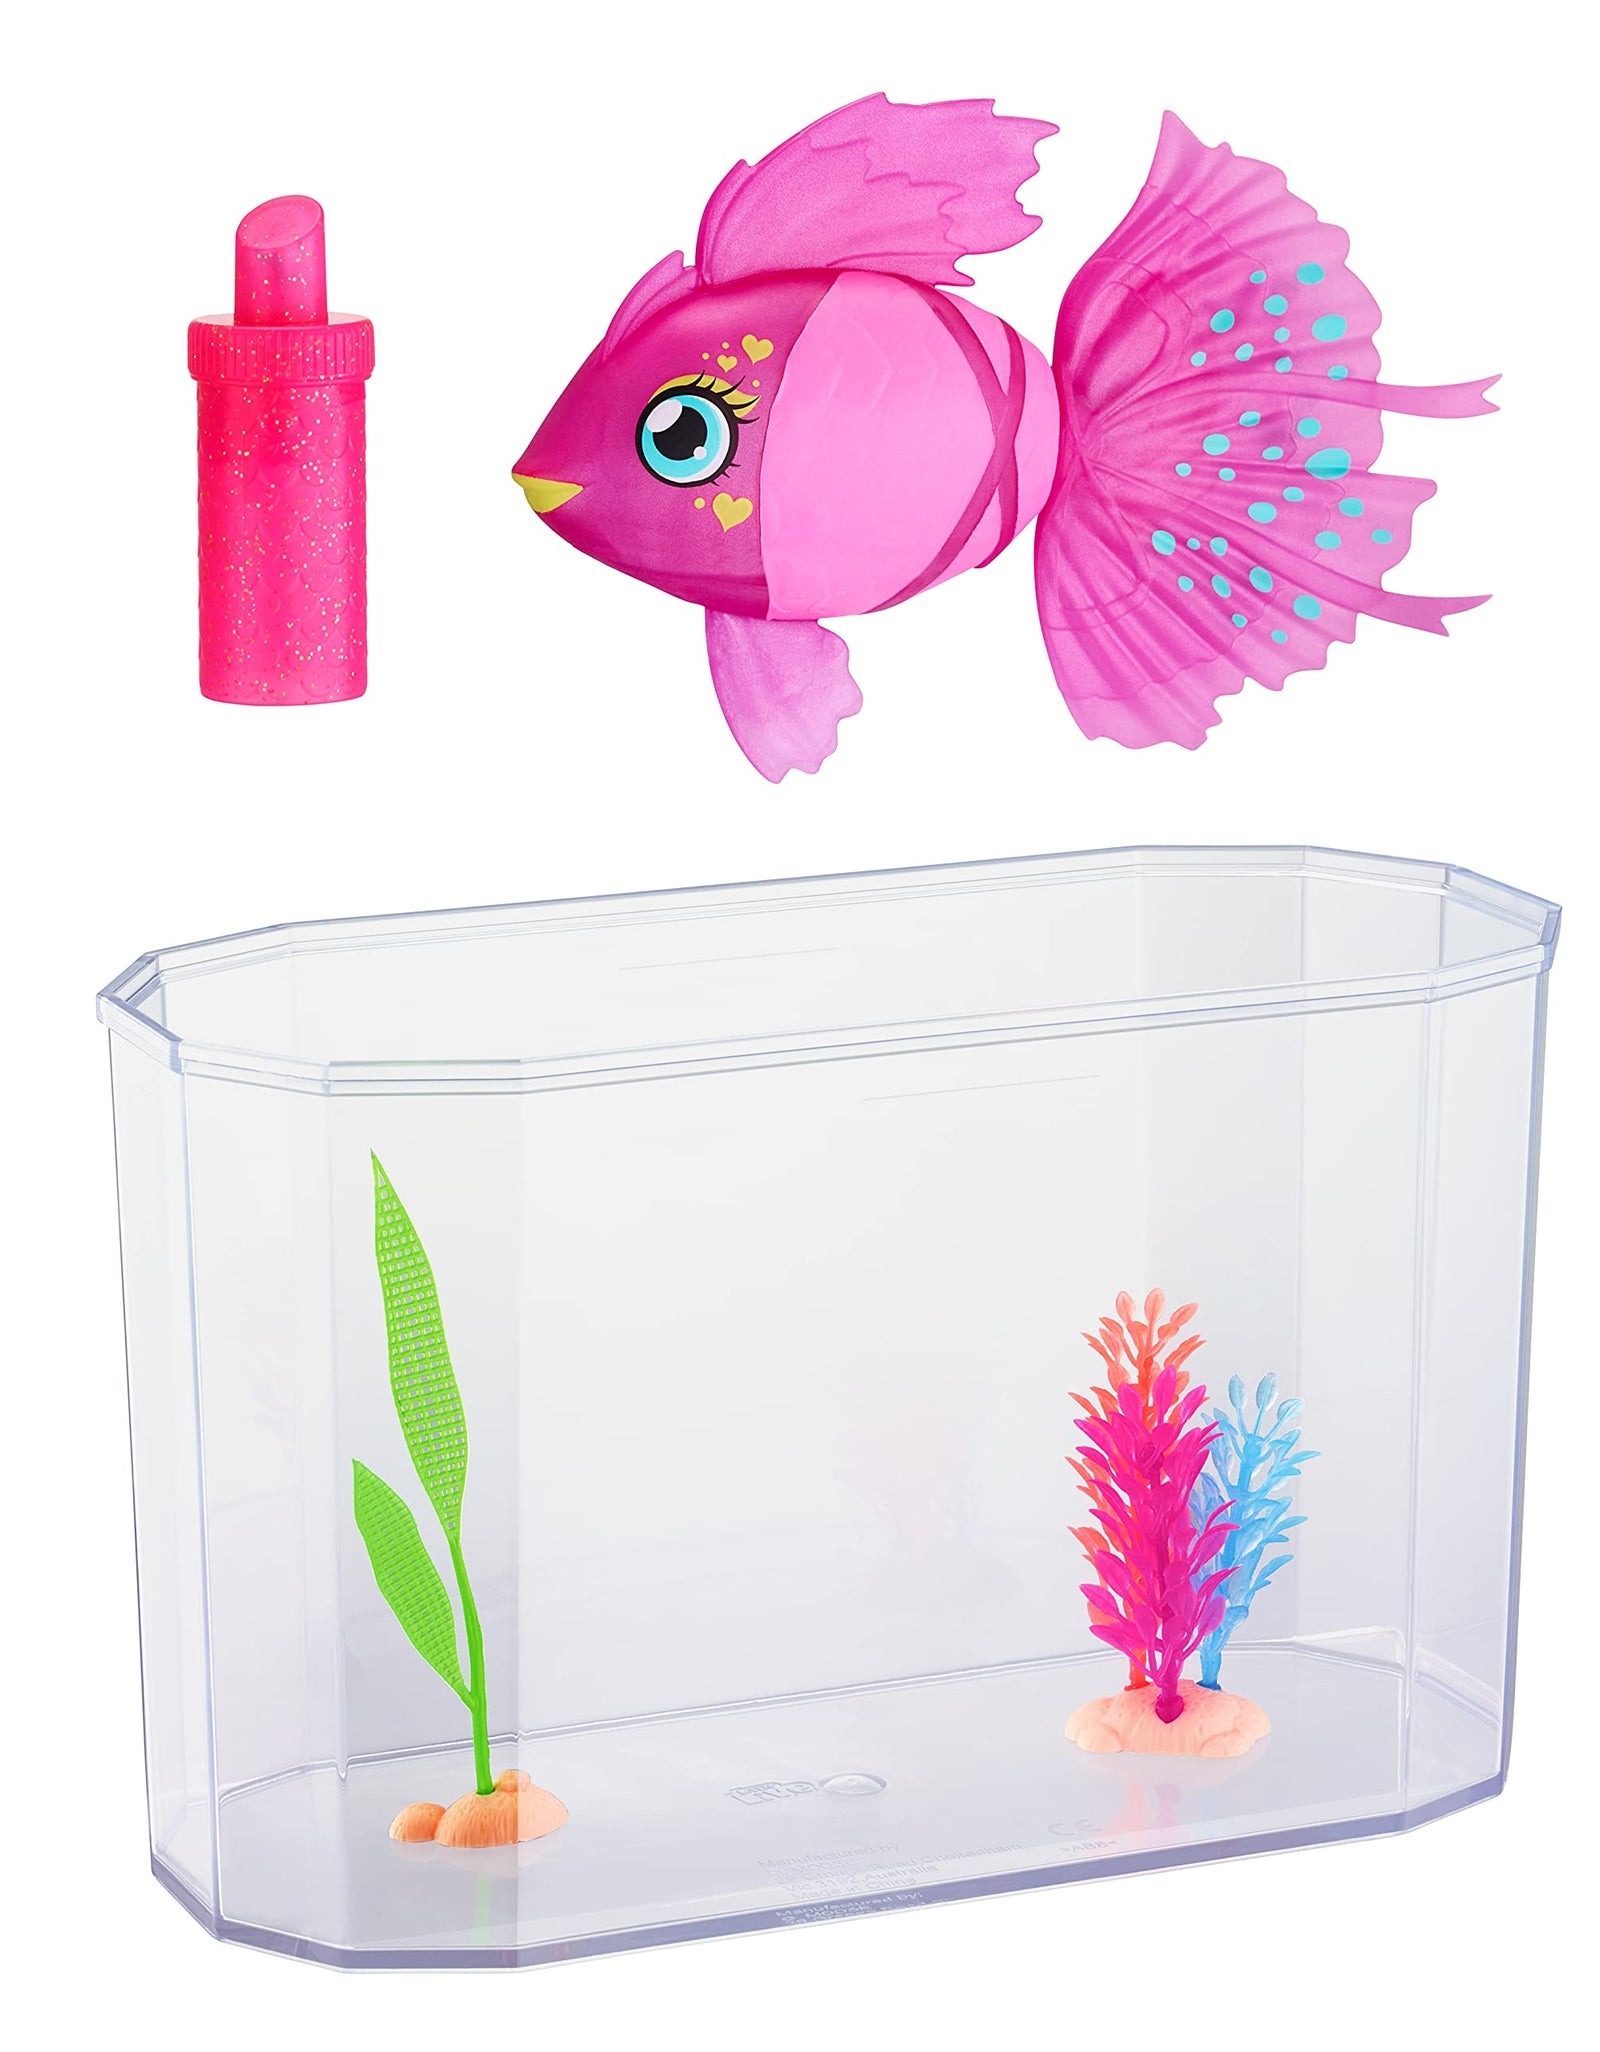 Little Live Pets - Lil' Dippers Fish Tank: Splasherina| Interactive Toy Fish & Tank , Magically Comes Alive in Water, Feed and Swims Like A Real Fish